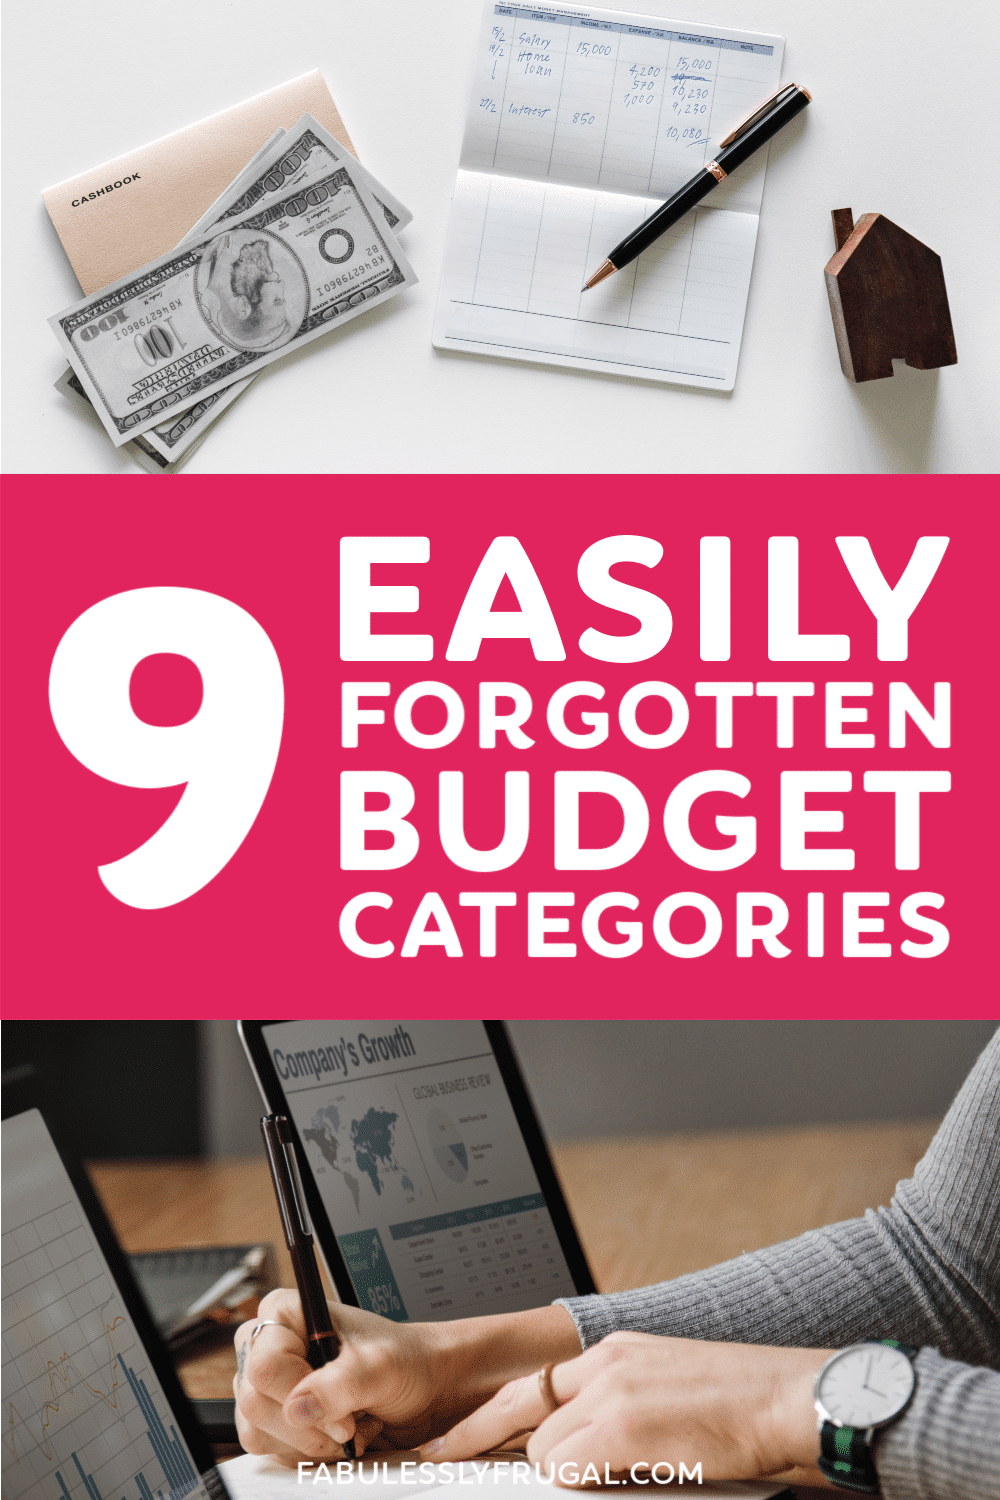 Commonly forgotten budget categories